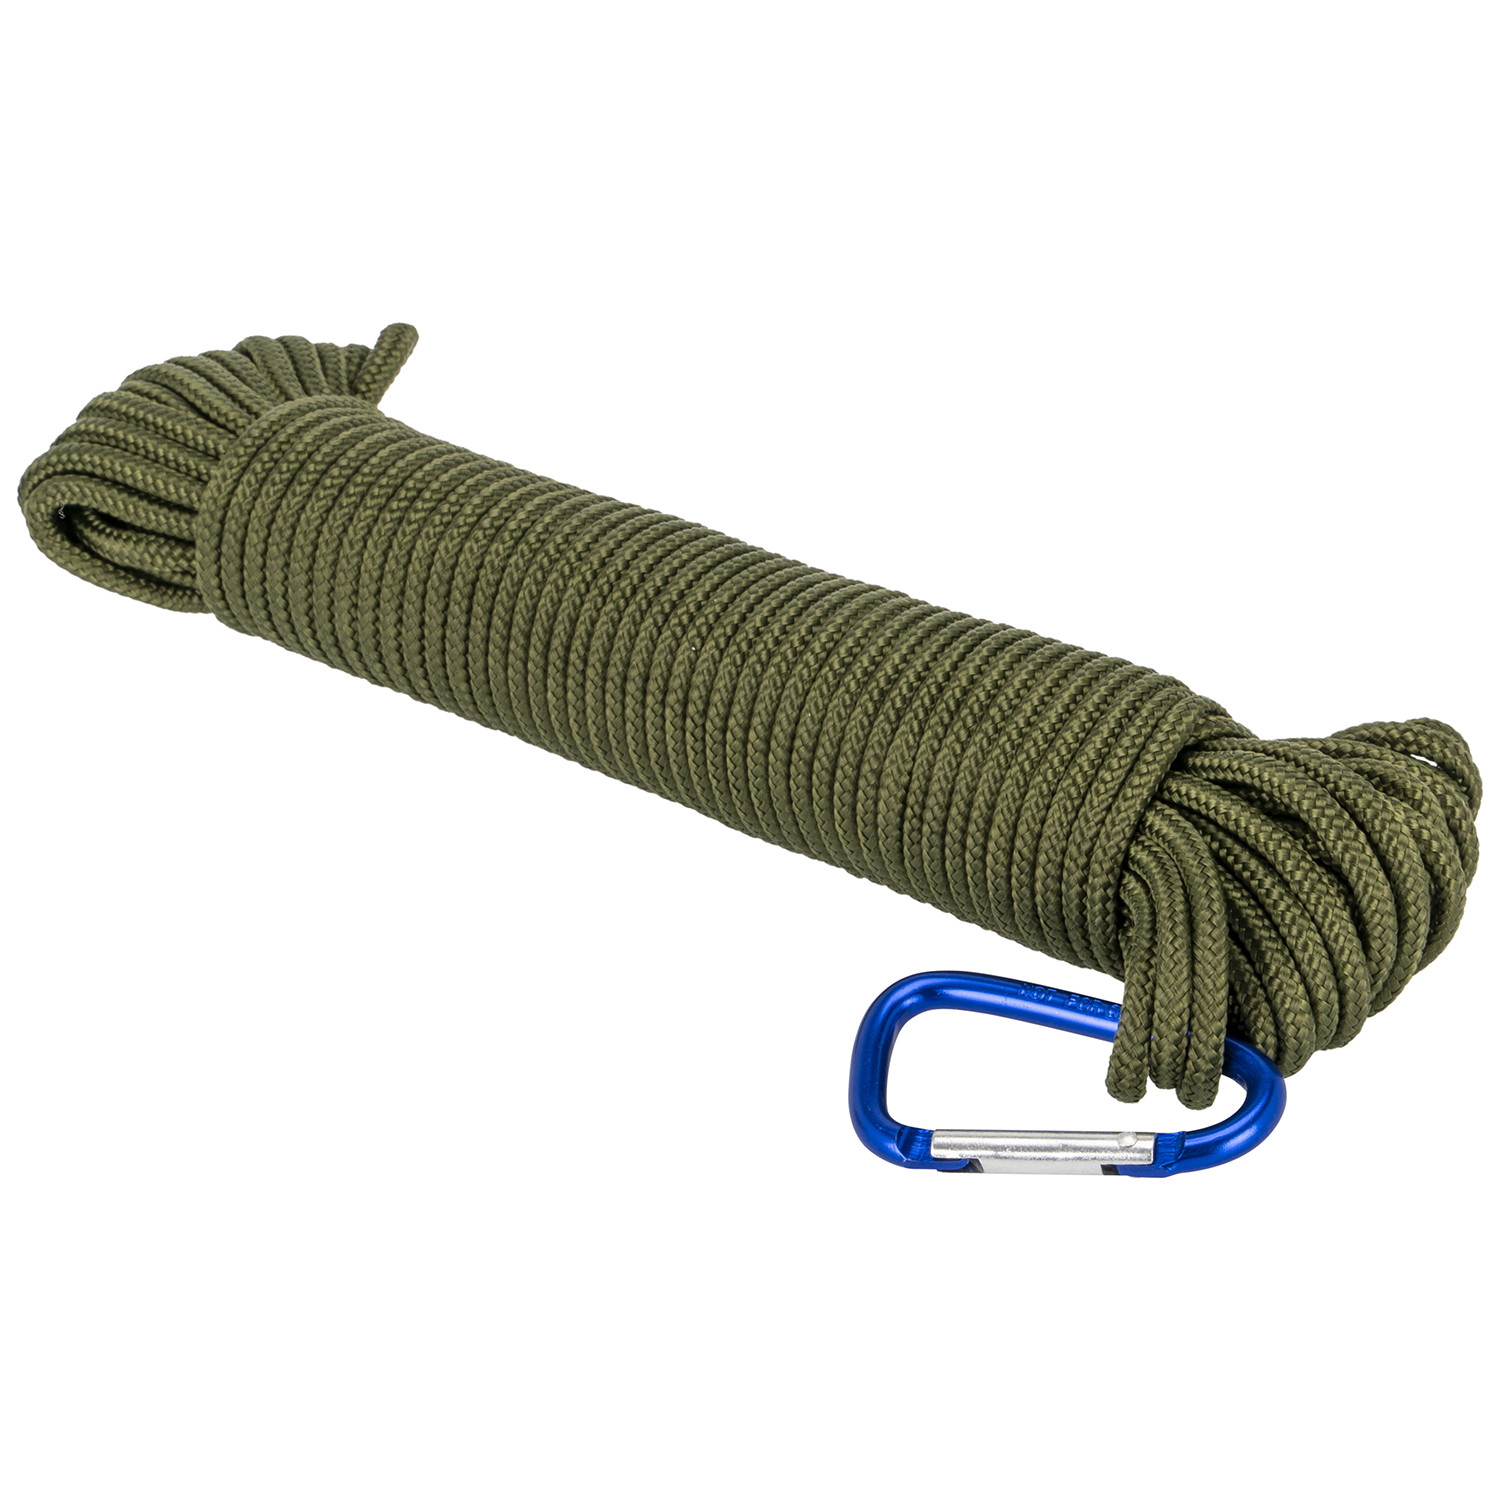 Active Sport 5mm x 15m Utility Rope with Carabiner Image 2